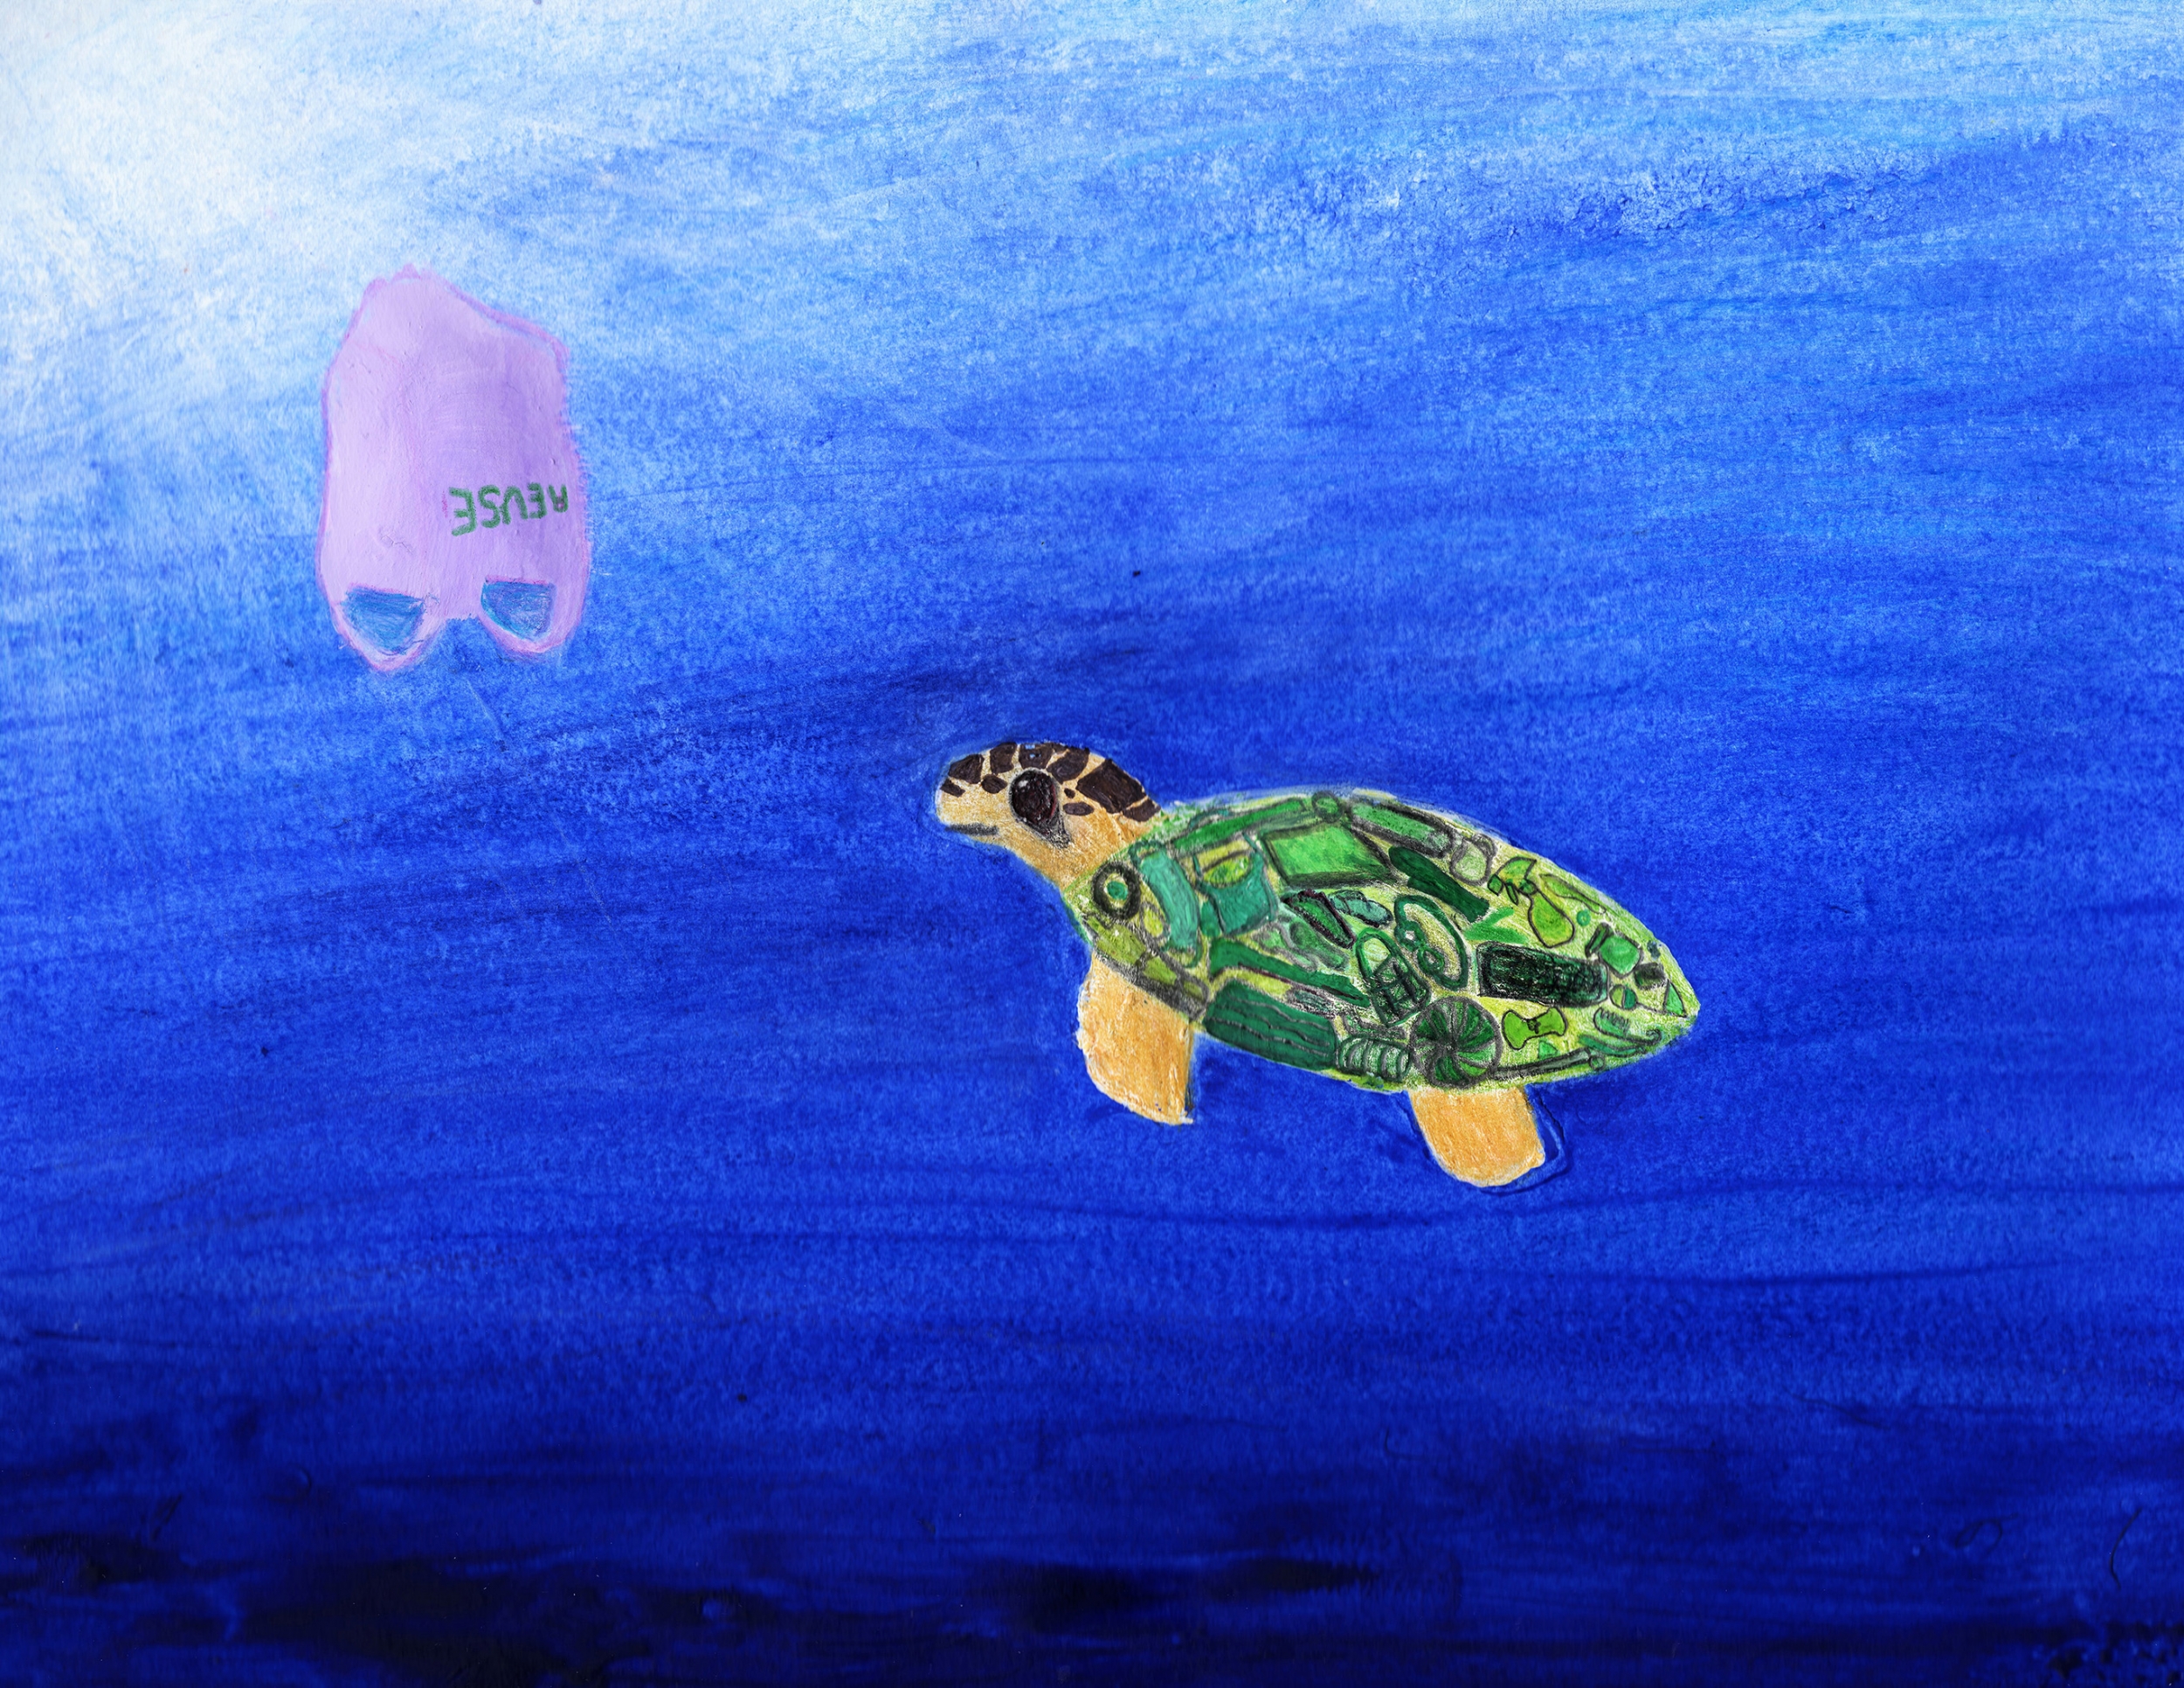 A sea turtle with a collage of debris items in its shell looks at a floating plastic bag in the ocean, artwork by Clara G. (Grade 8, California), winner of the NOAA Marine Debris Program Art Contest.